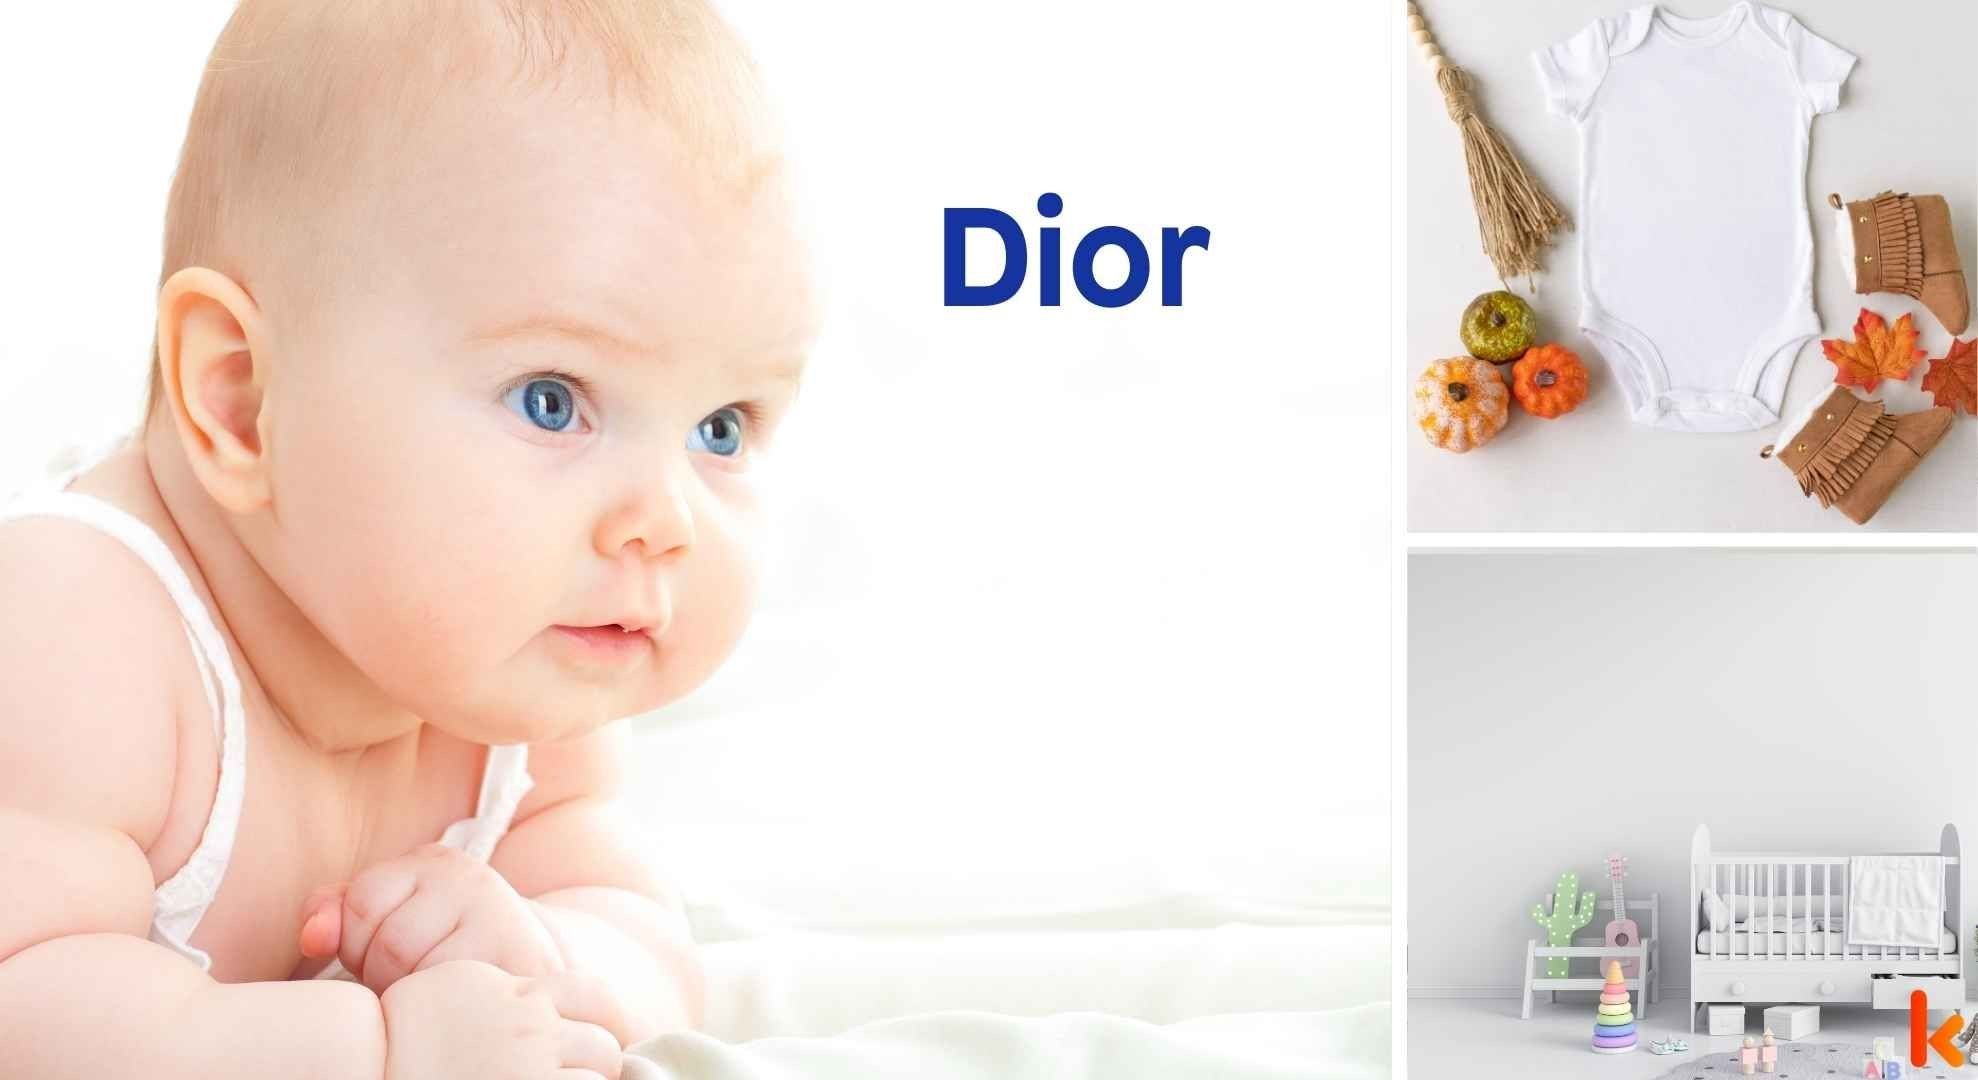 Meaning of the name Dior